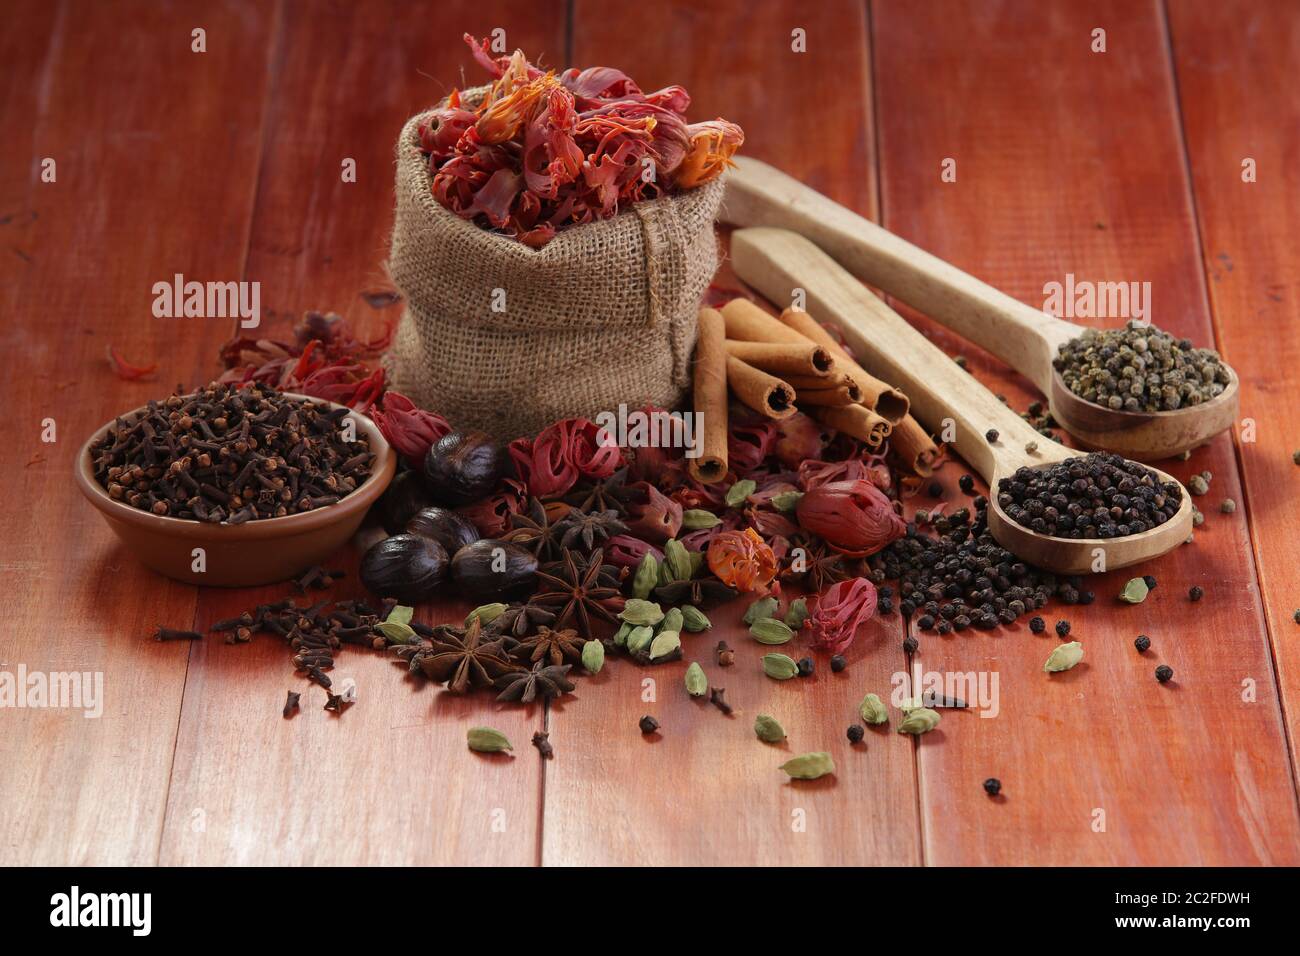 Dried Spices Black pepper,Green pepper,Mace or Javiithri flower,Nutmeg,Clove,Cinnamon,Cardamom,Star Anise arranged on a wooden surface Stock Photo